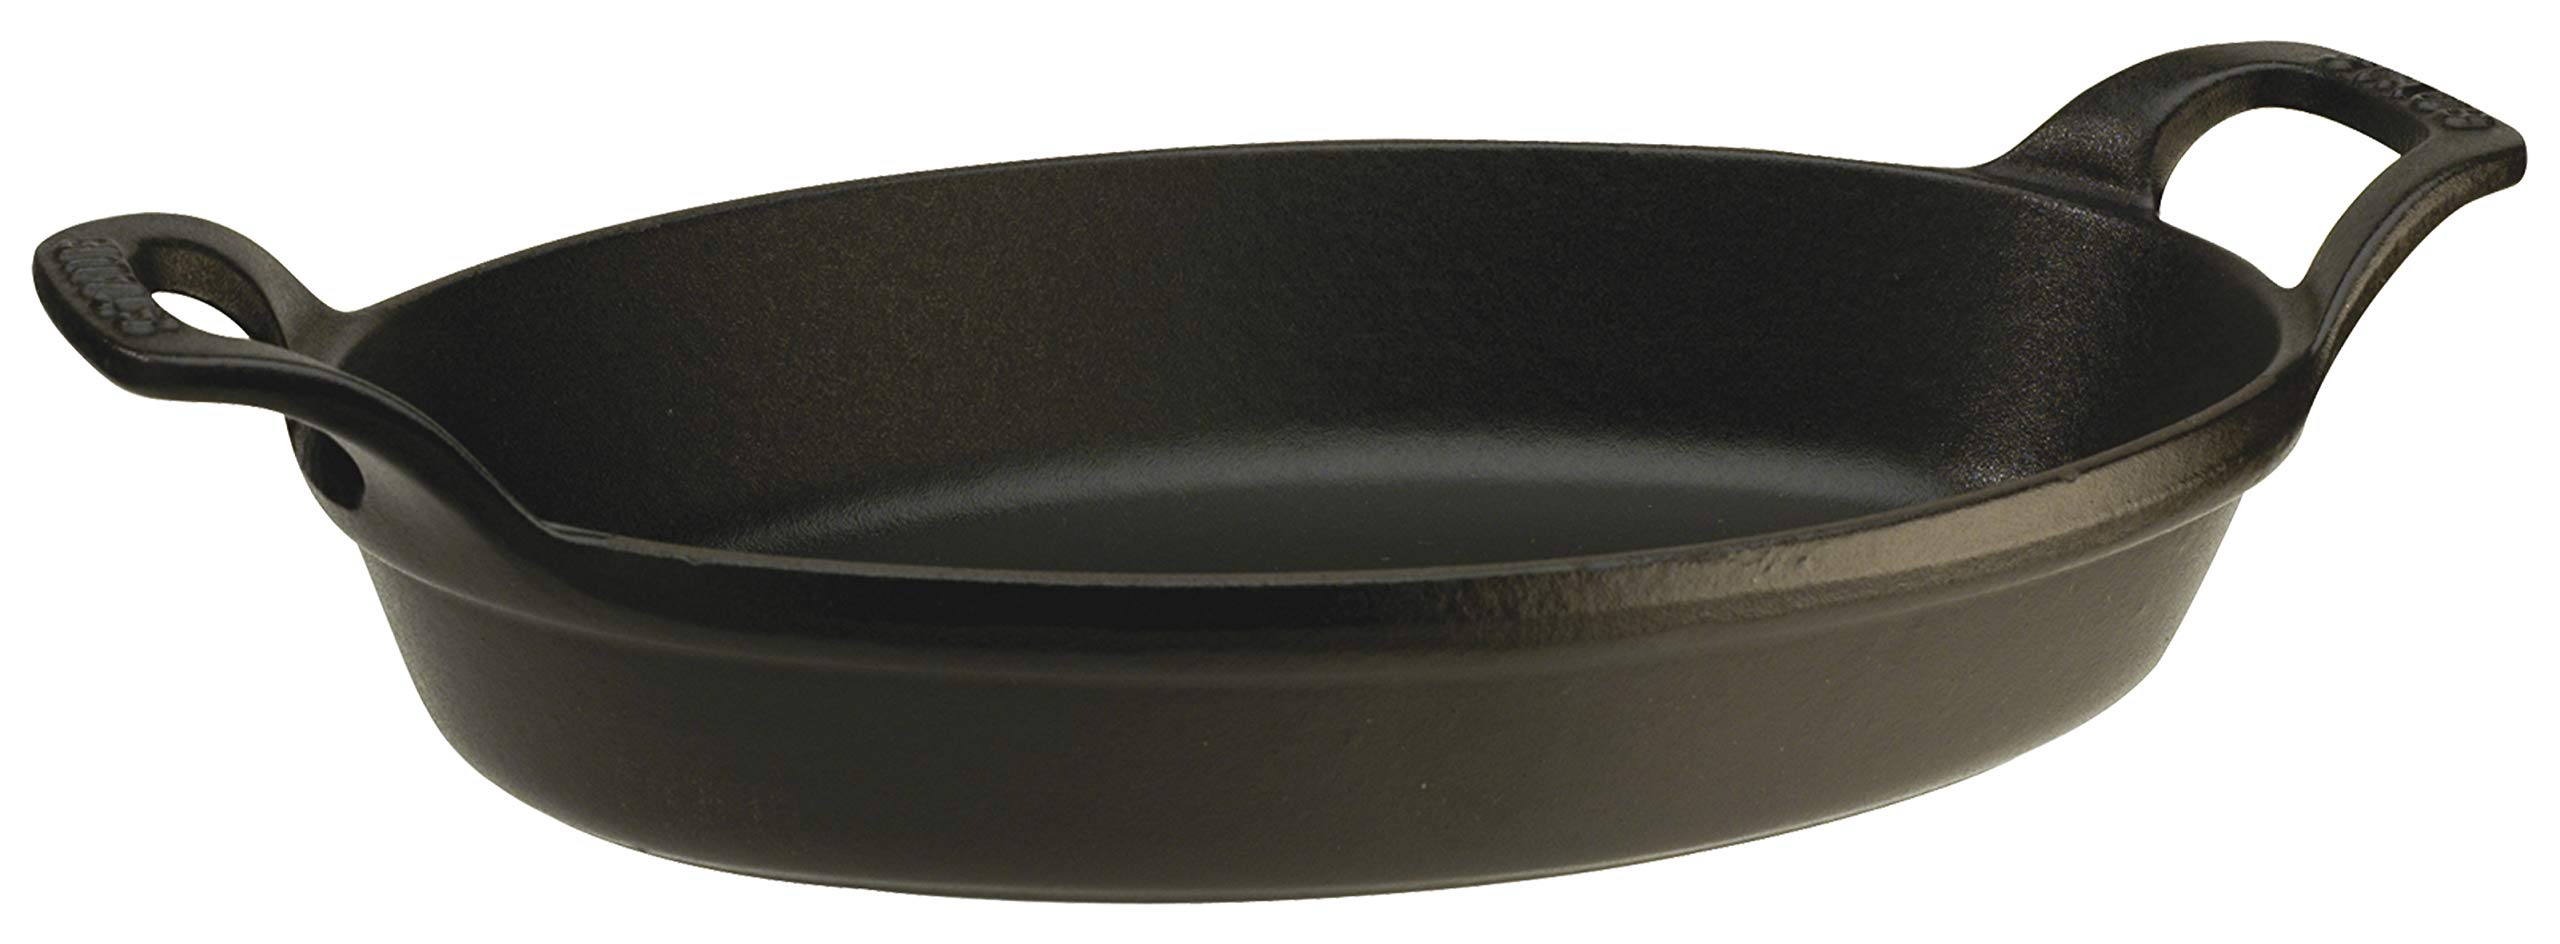 Staub 40508-283 Oval Stackable Dish, Black, 14.6 inches (37 cm), Cast Enamel, Iron